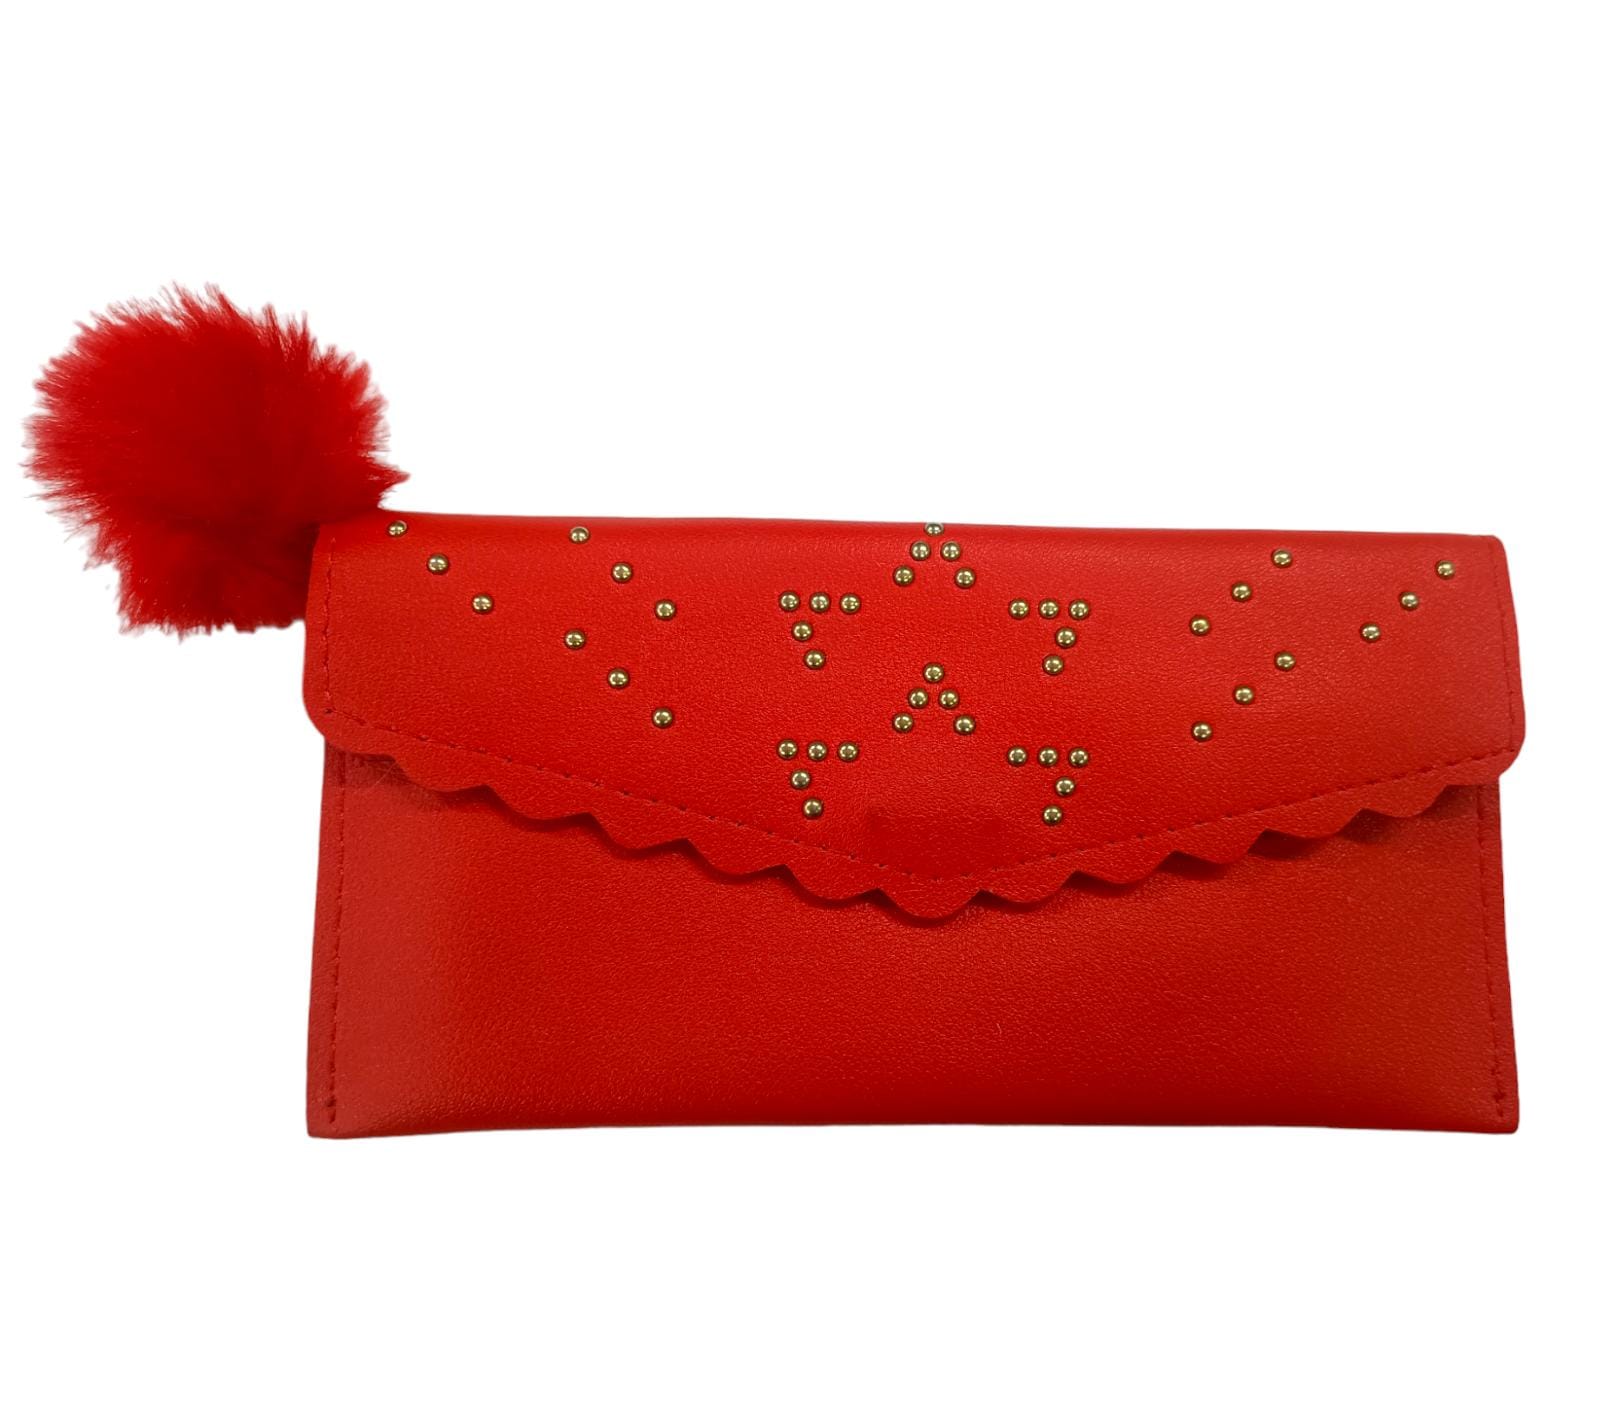 Red Hand Purse For Women 